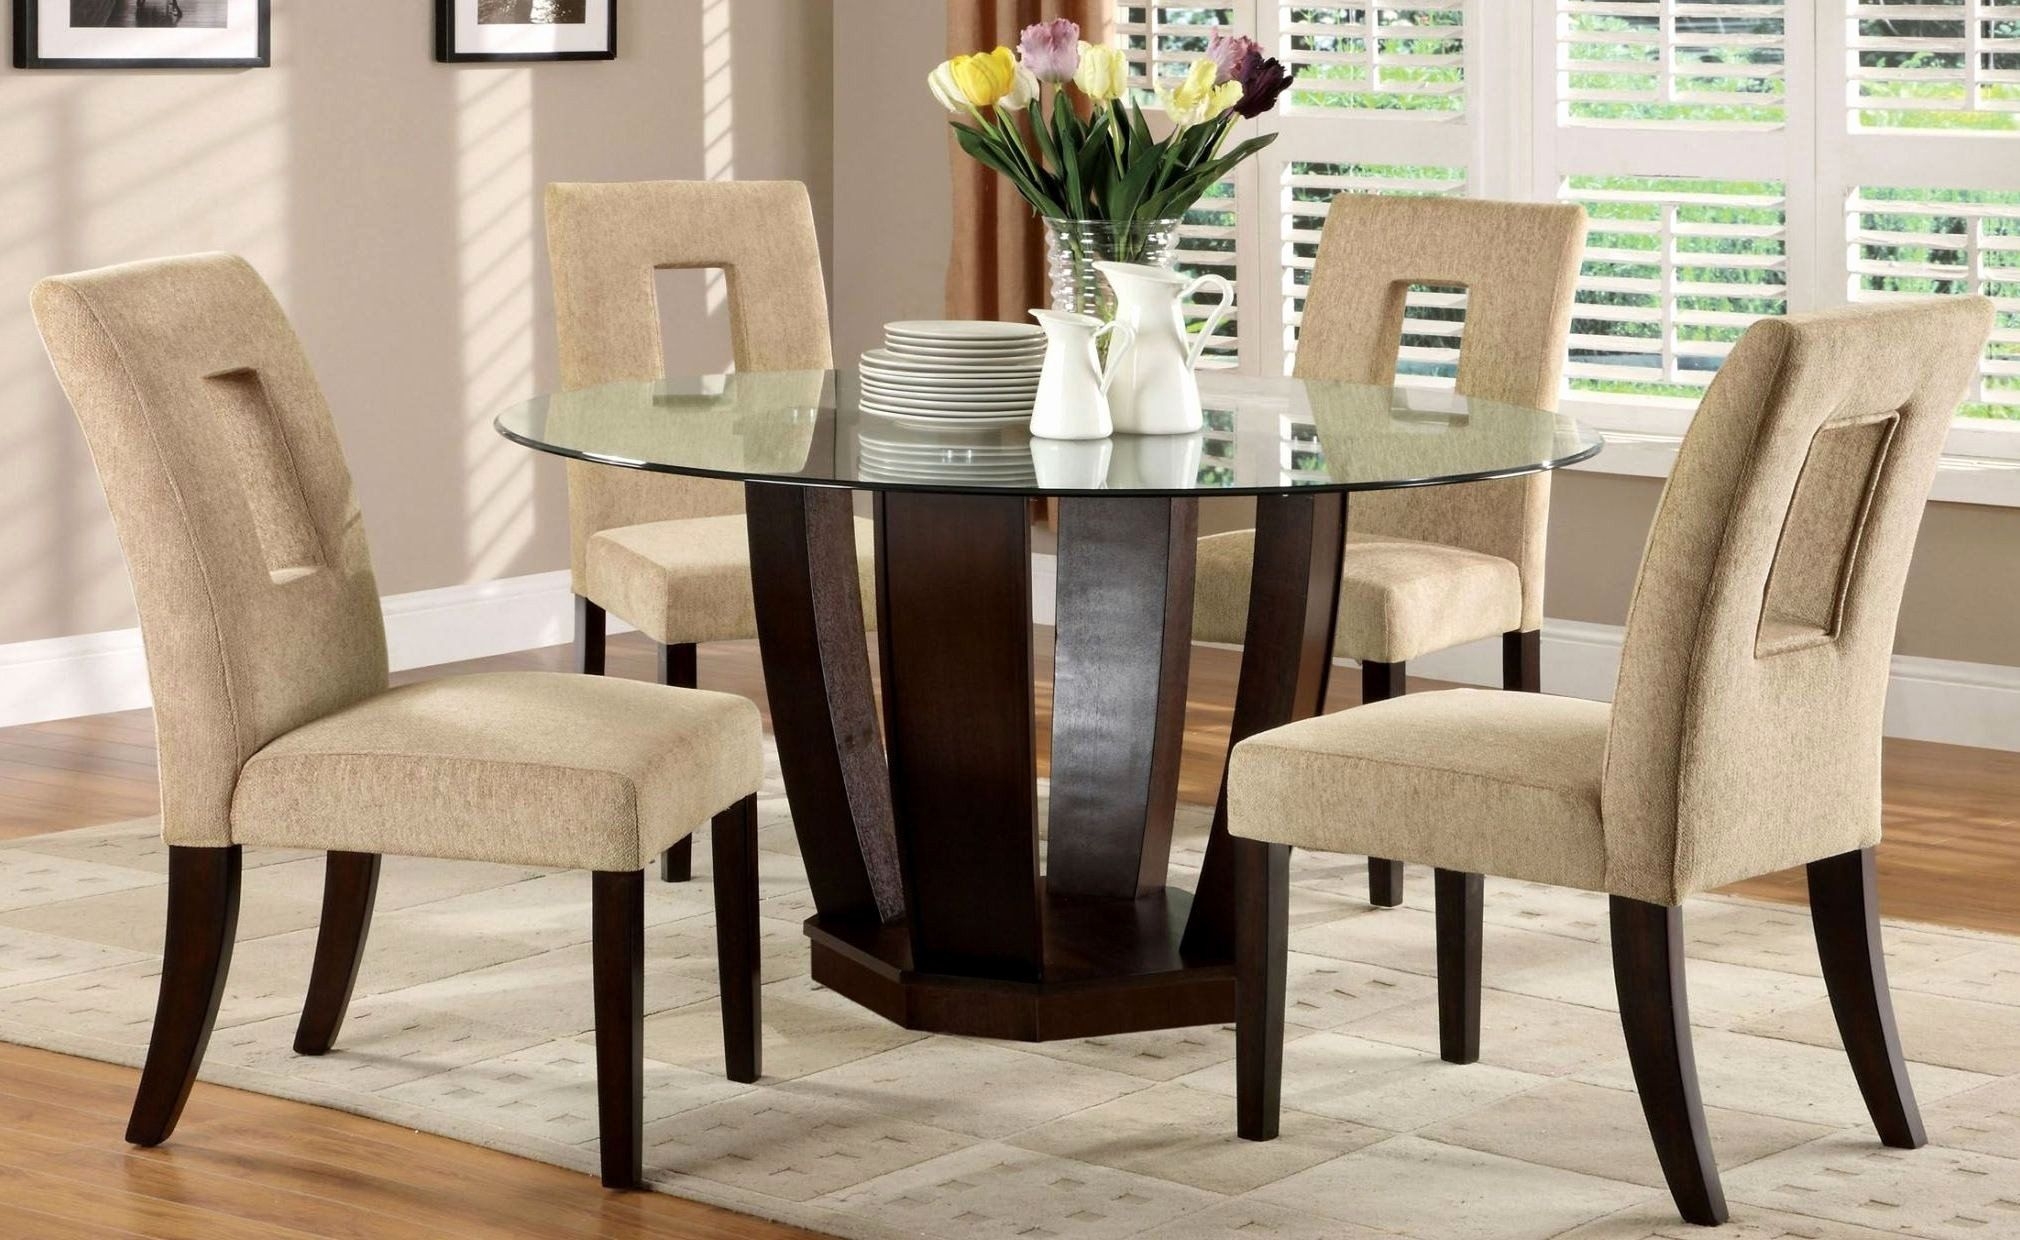 Furniture of America Valyria 5-Piece Round Dining Table Set with 10mm Tempered Glass Top, Espresso Finish